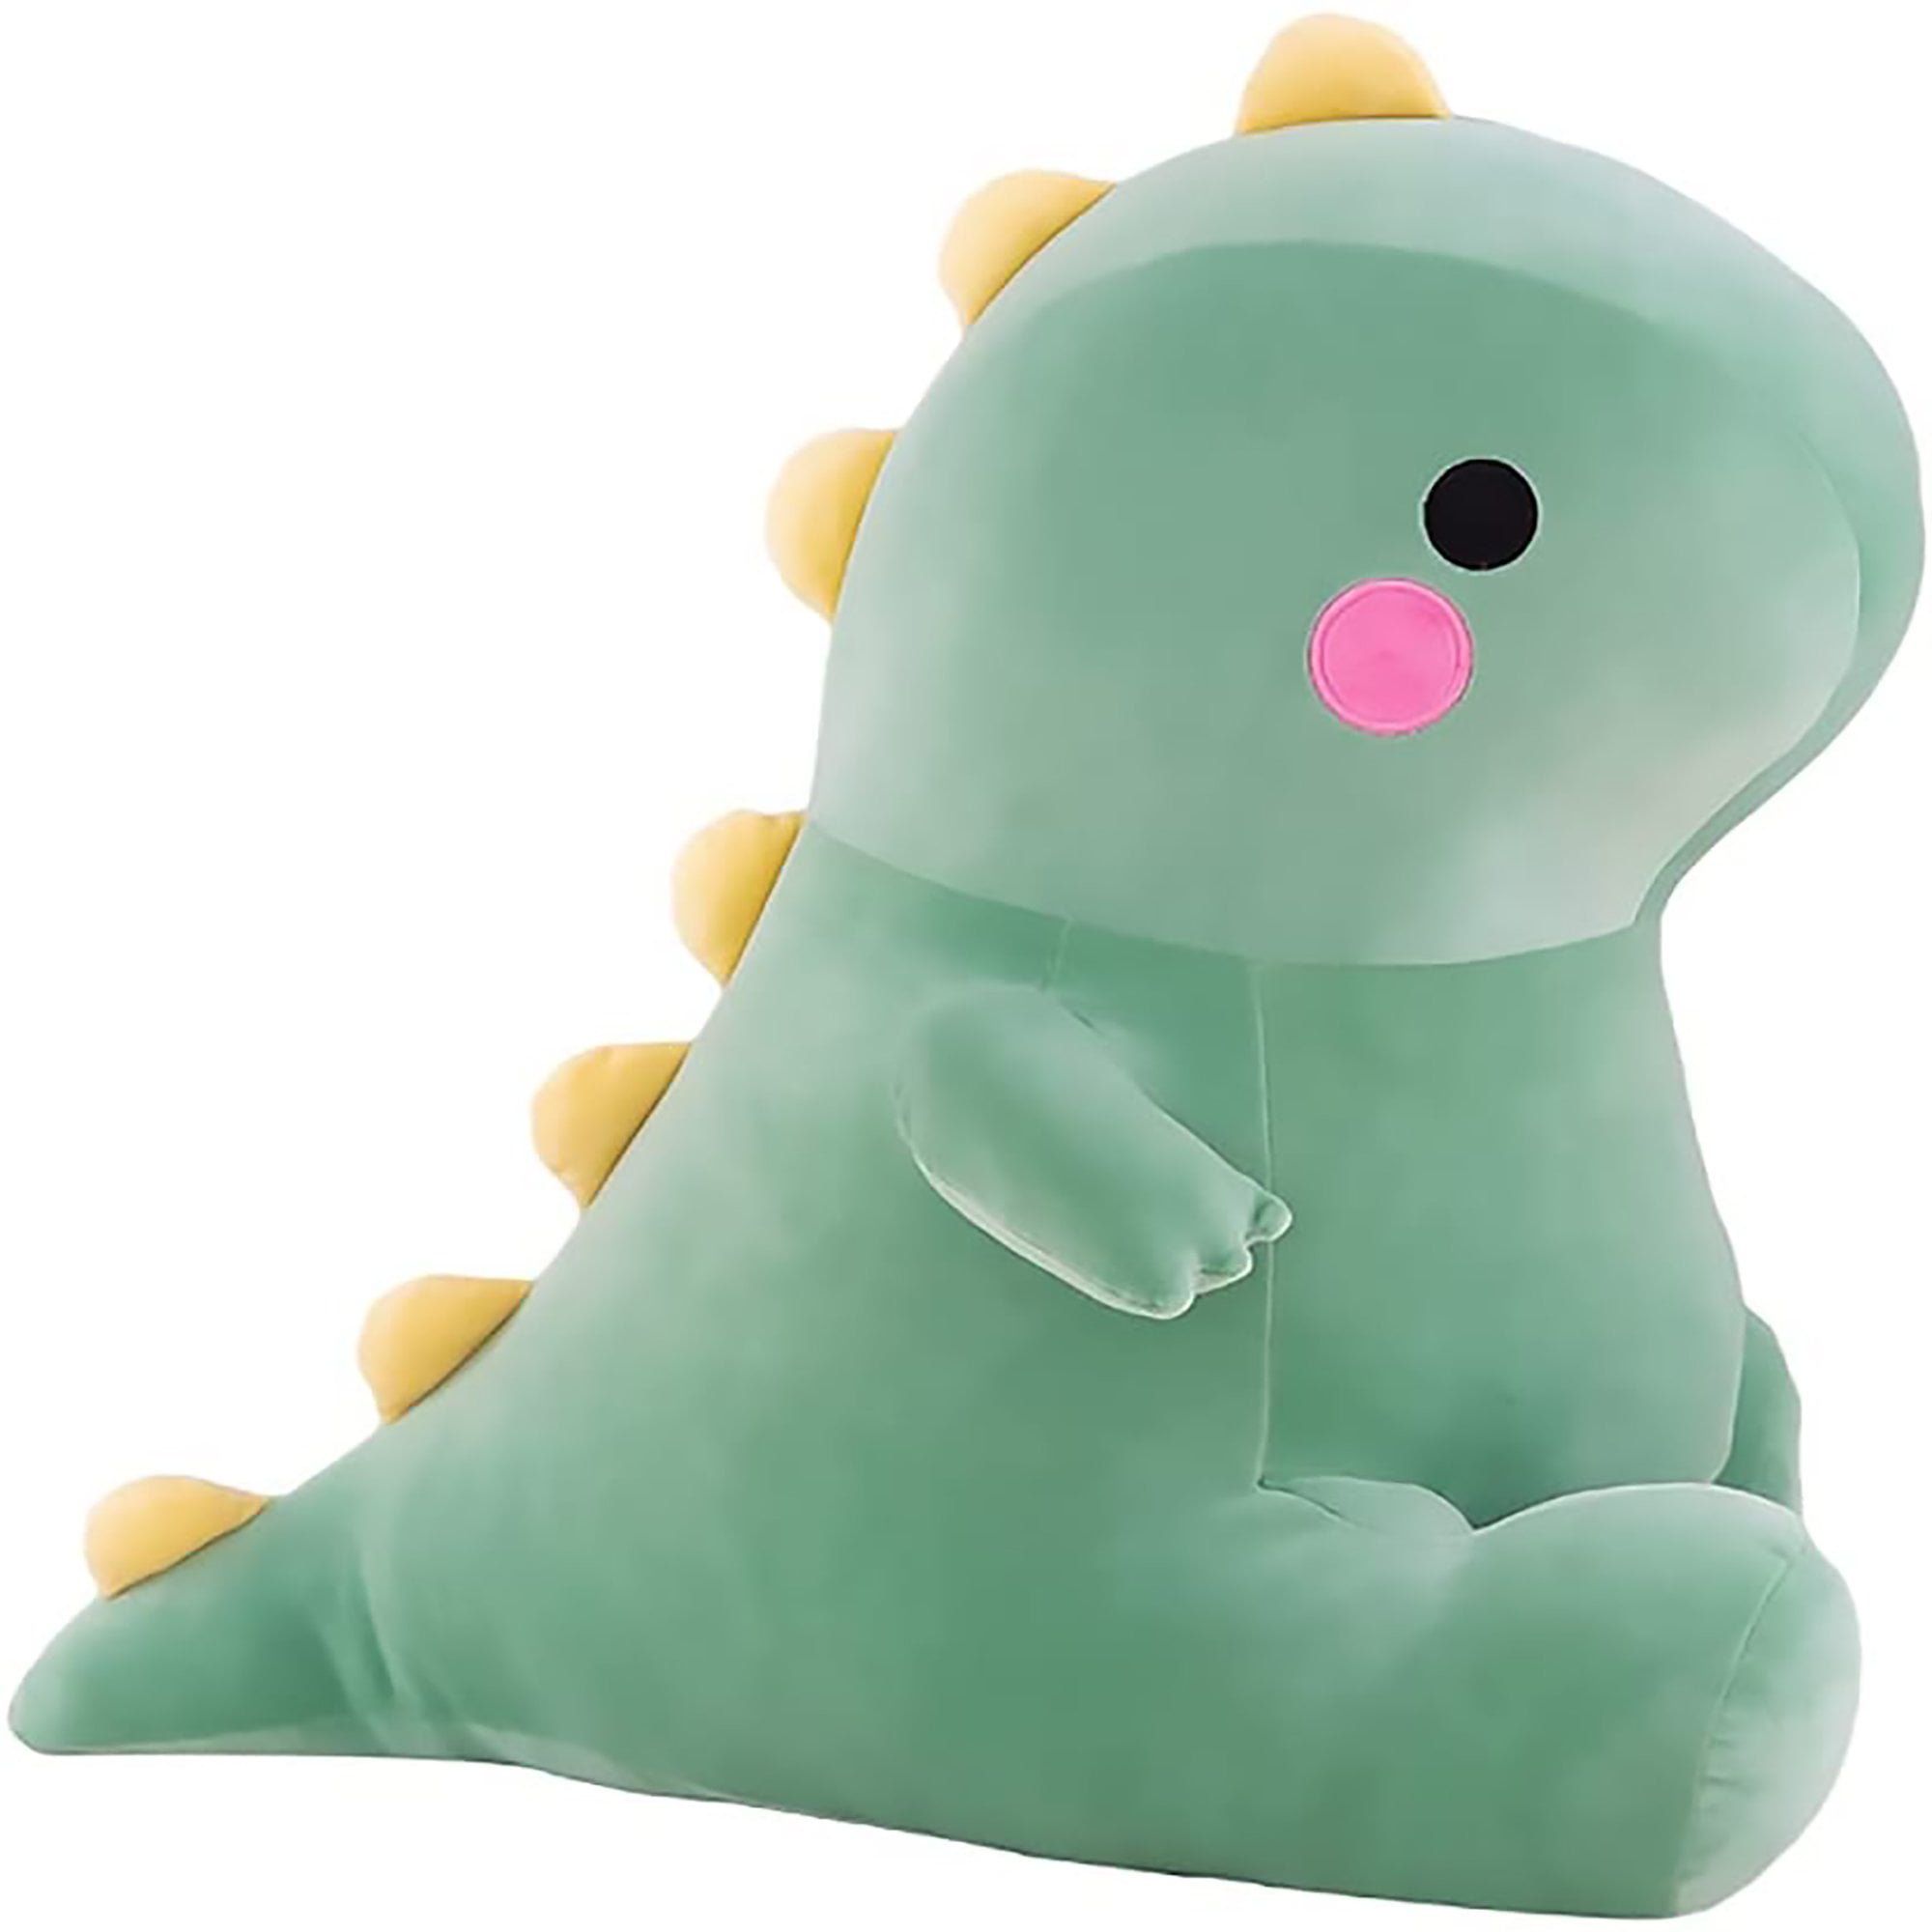 Details about   Lovely Giant Plush Cute Stuffed Dinosaur Toy Huge Animals Dinosaur Pillow Doll 